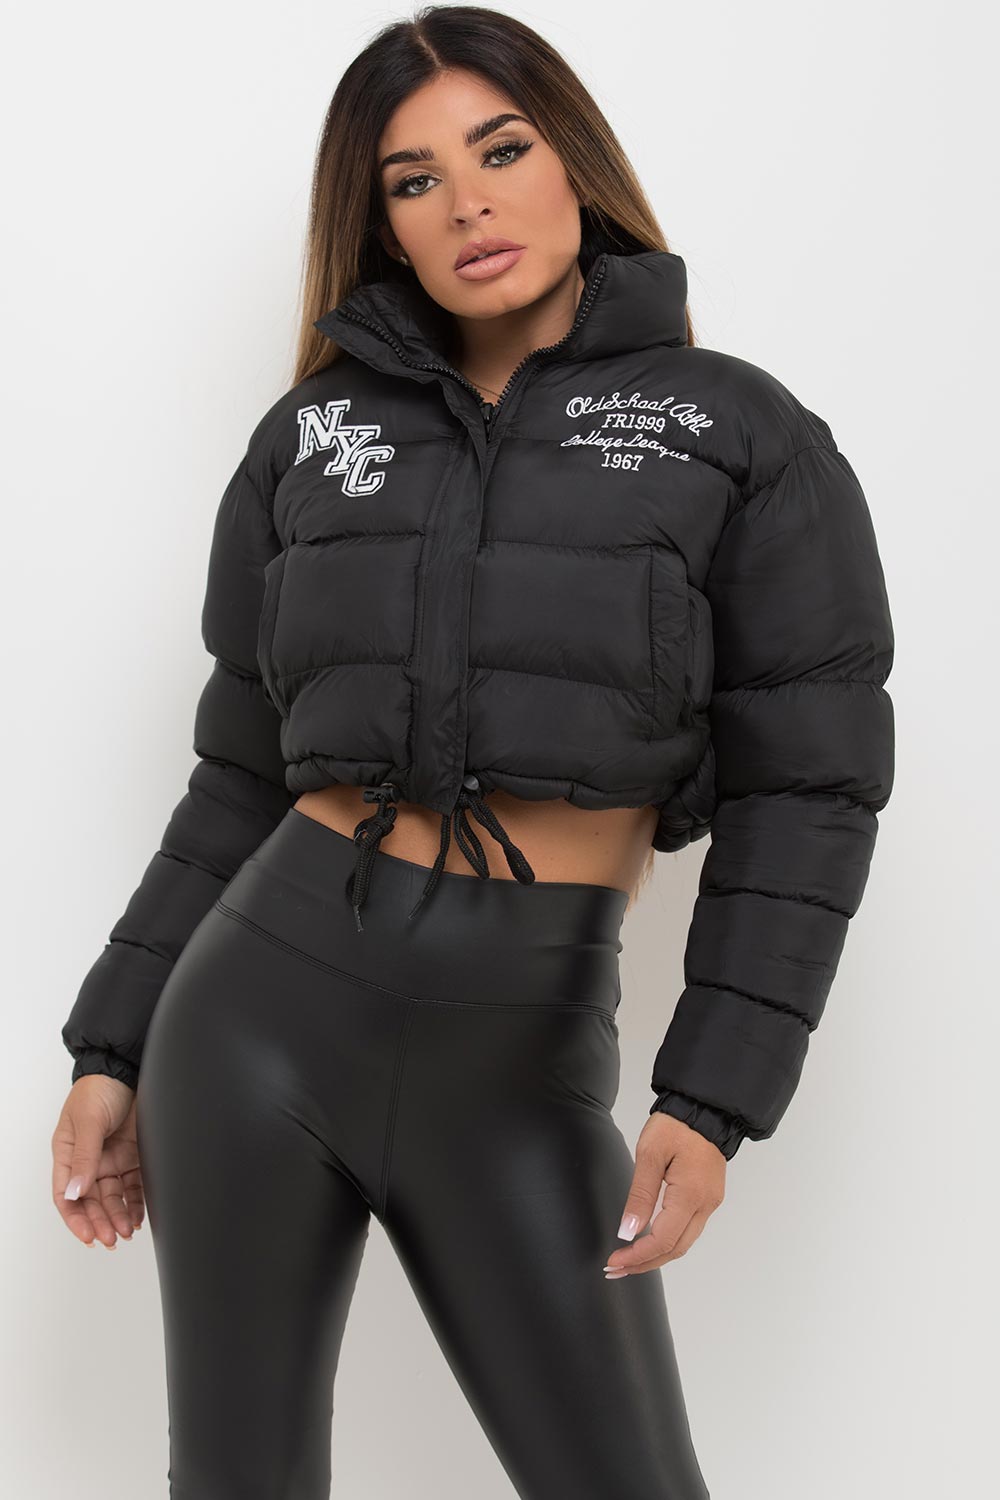 cropped black puffer jacket with nyc slogan